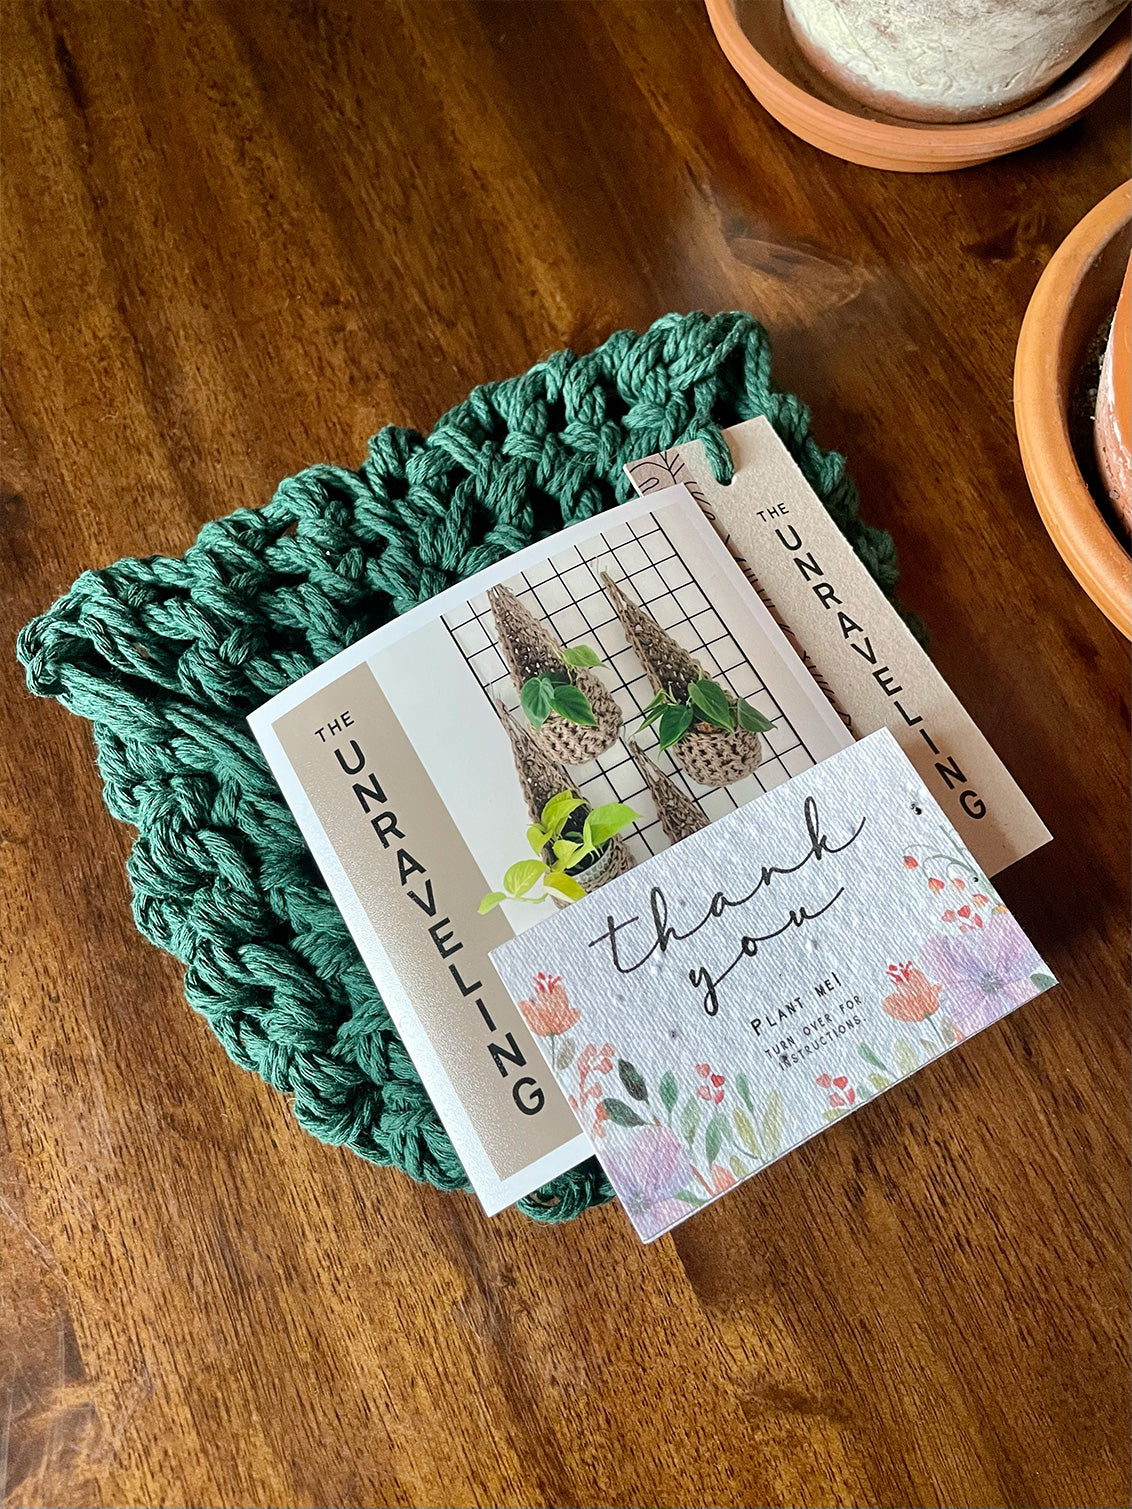 Photo showing handmade green plant hanger folded and ready for posting with handwritten note to the customer and thank you seed card.